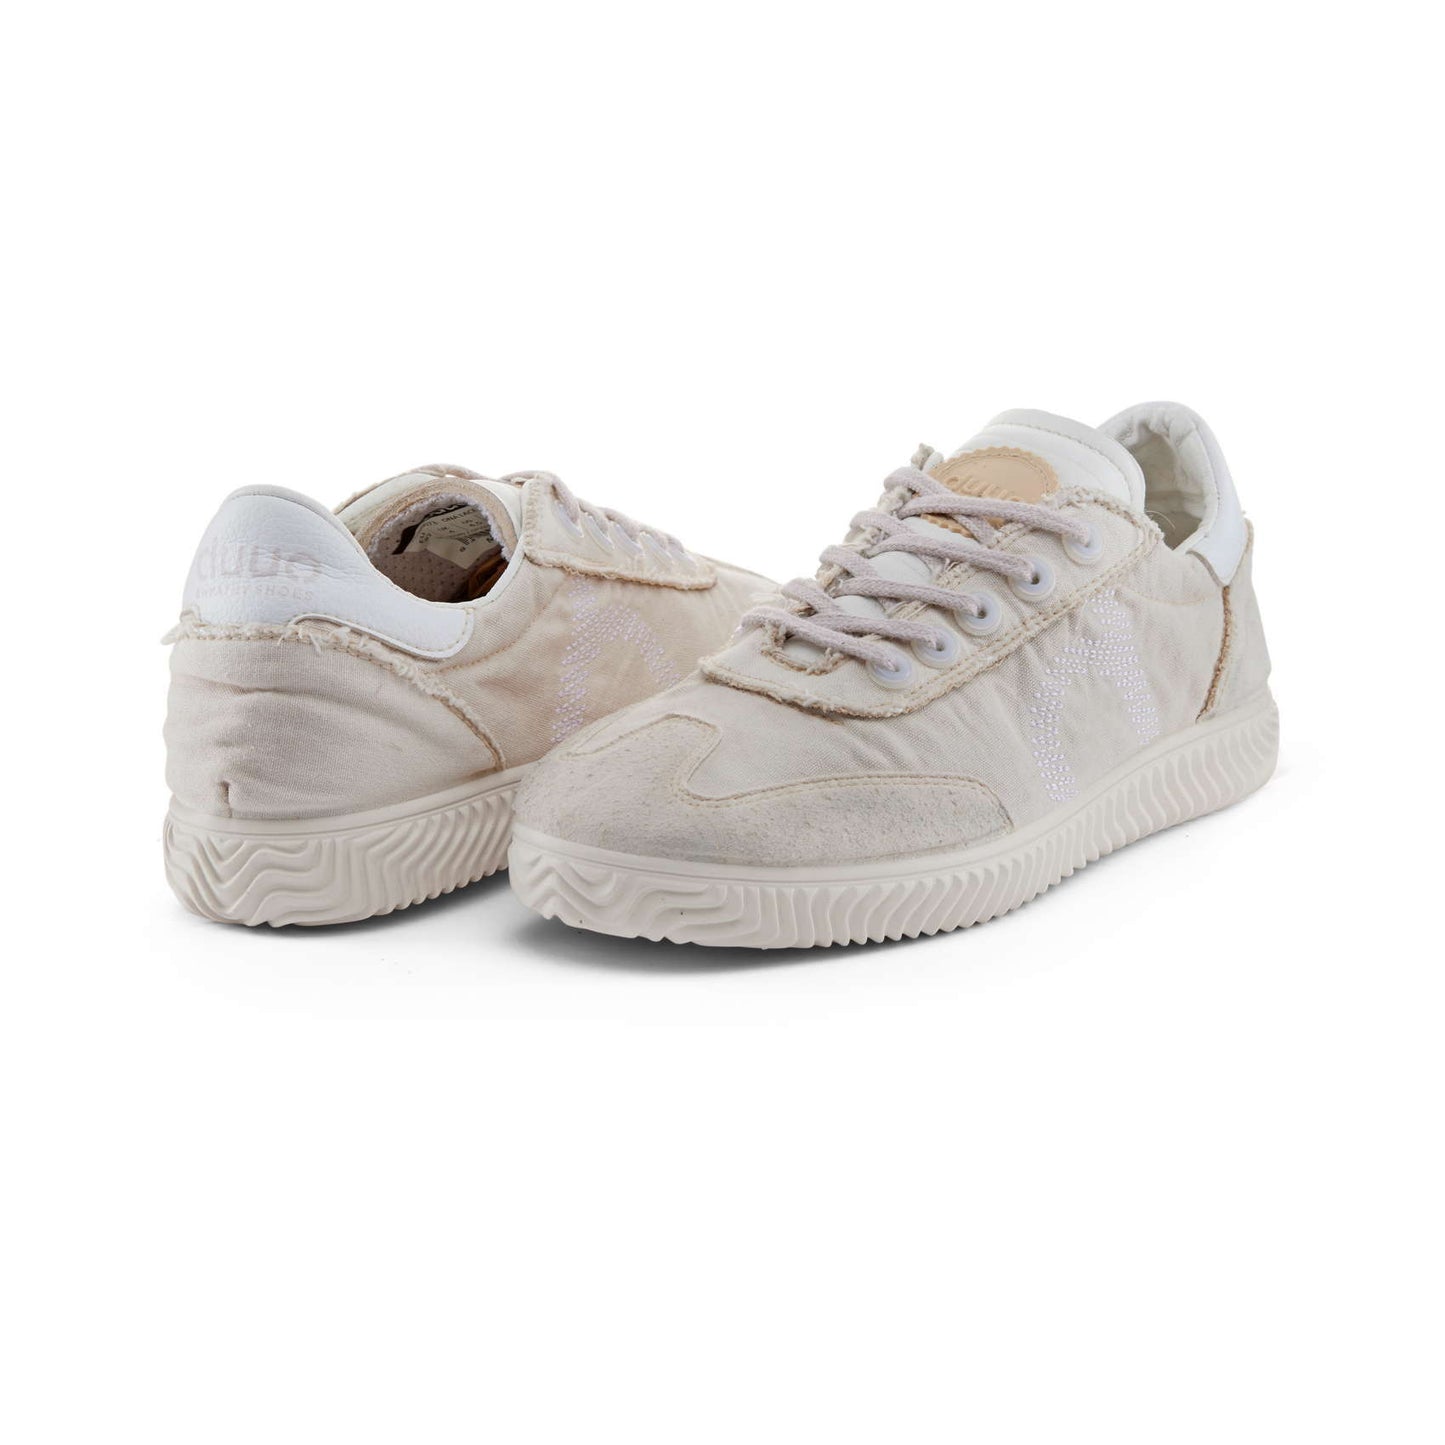 DUUO | SNEAKERS MUJER | ONA LACE WASHED 073 | BLANCO